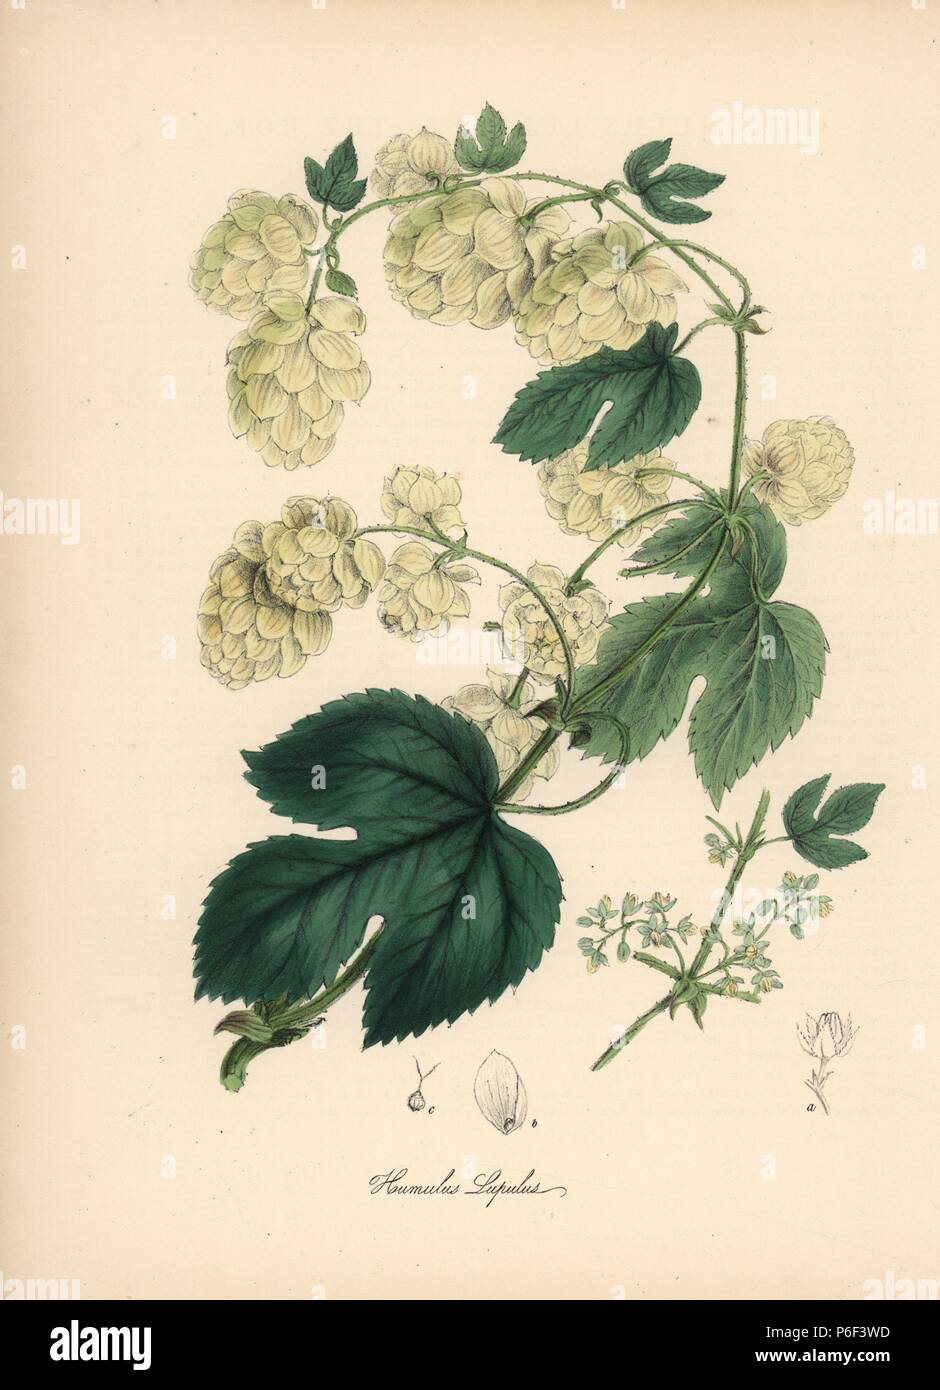 Hops, Humulus lupulus. Handcoloured zincograph by C. Chabot drawn by Miss M. A. Burnett from her 'Plantae Utiliores: or Illustrations of Useful Plants,' Whittaker, London, 1842. Miss Burnett drew the botanical illustrations, but the text was chiefly by her late brother, British botanist Gilbert Thomas Burnett (1800-1835). Stock Photo